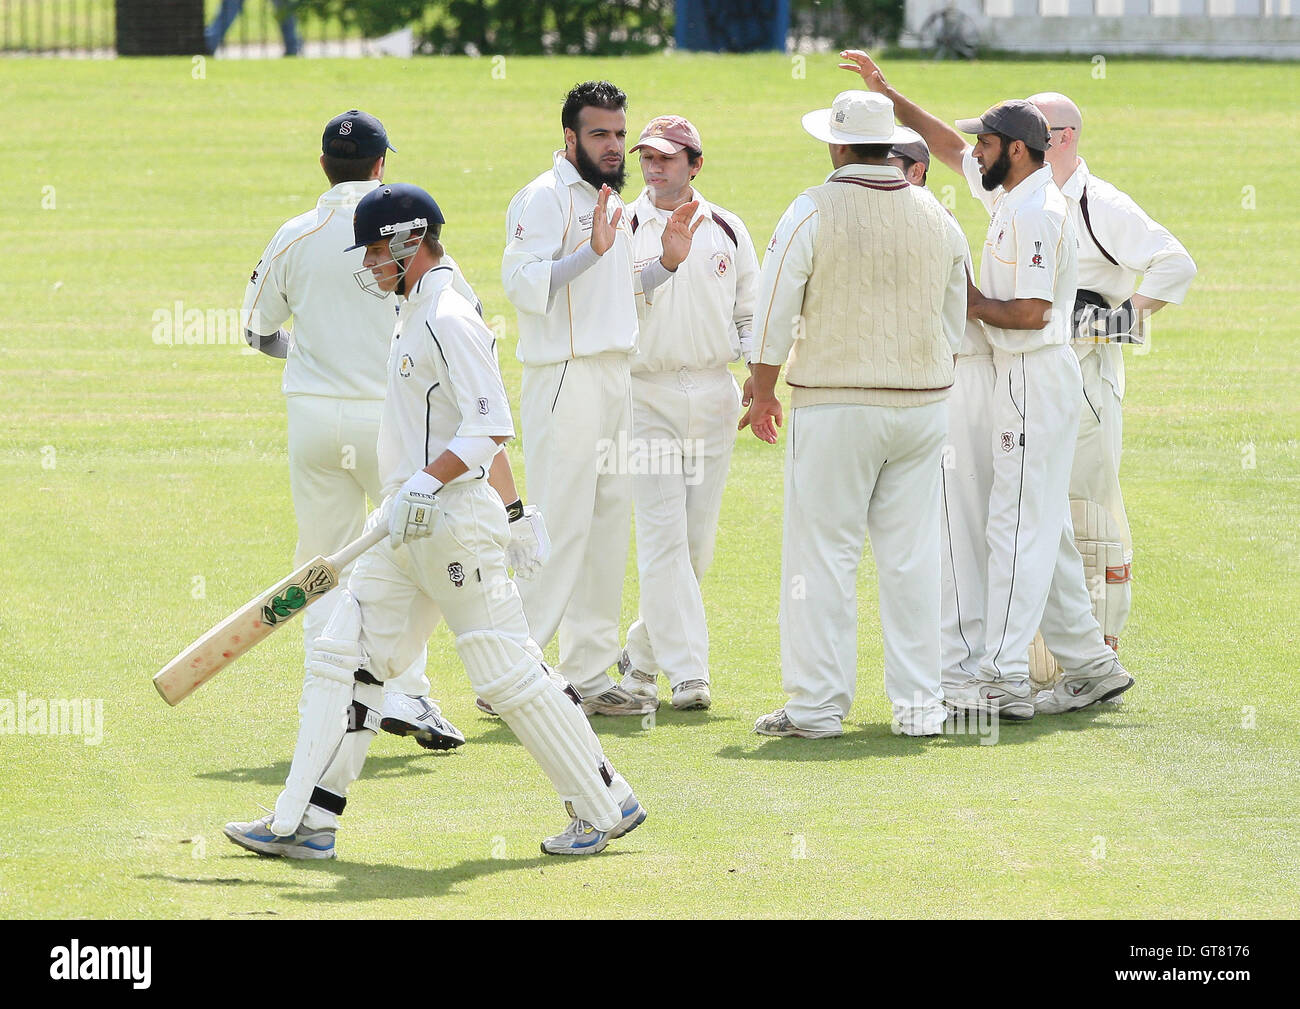 I Shah of Hainault & Clayhall clean bowls T Thompson (foreground) of Ardleigh Green and celebrates with his team mates - Ardleigh Green CC vs Hainault & Clayhall CC - Essex Cricket League Cup at Central Park - 02/05/09. Stock Photo